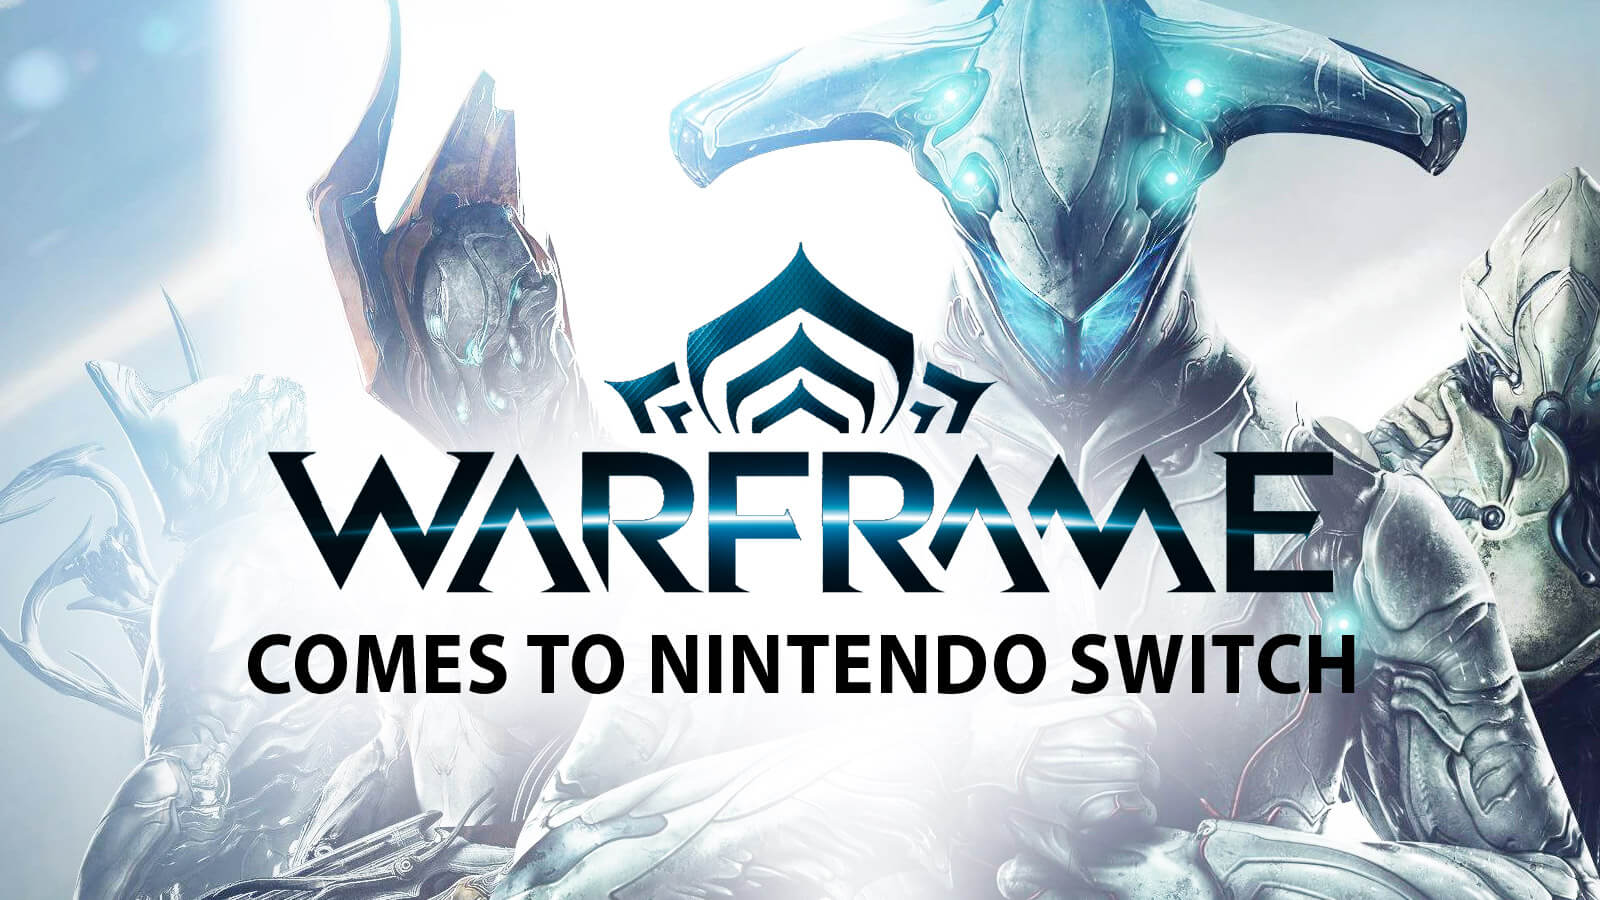 Warframe launches on Nintendo Switch in time for the holiday break